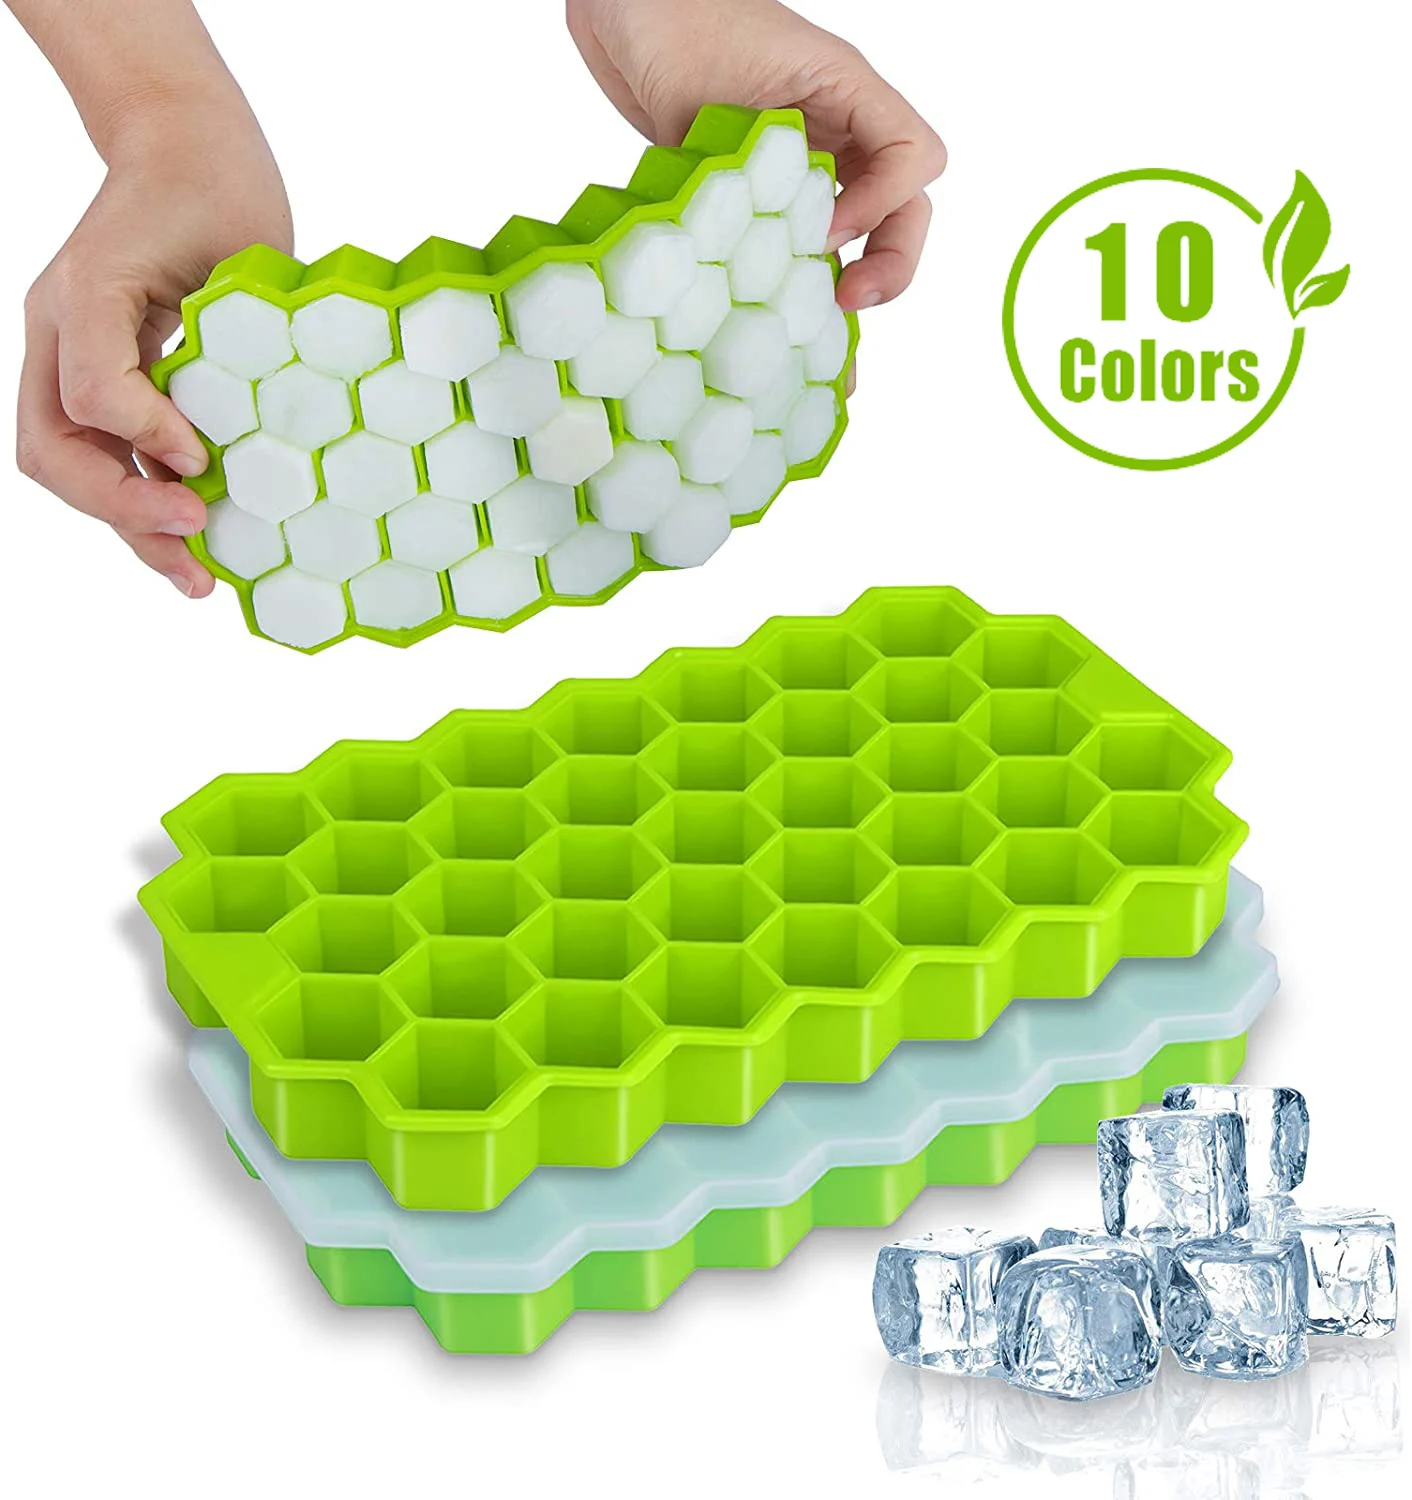 Freezer Easy-Release Silicone Ice Moulds with Removeable Lids Theone 3 Packs Ice Cube Tray Whiskey and Cocktail Perfect for Drinks LFGB Certified and BPA Free Yellow+Green+Blue Baby Food 